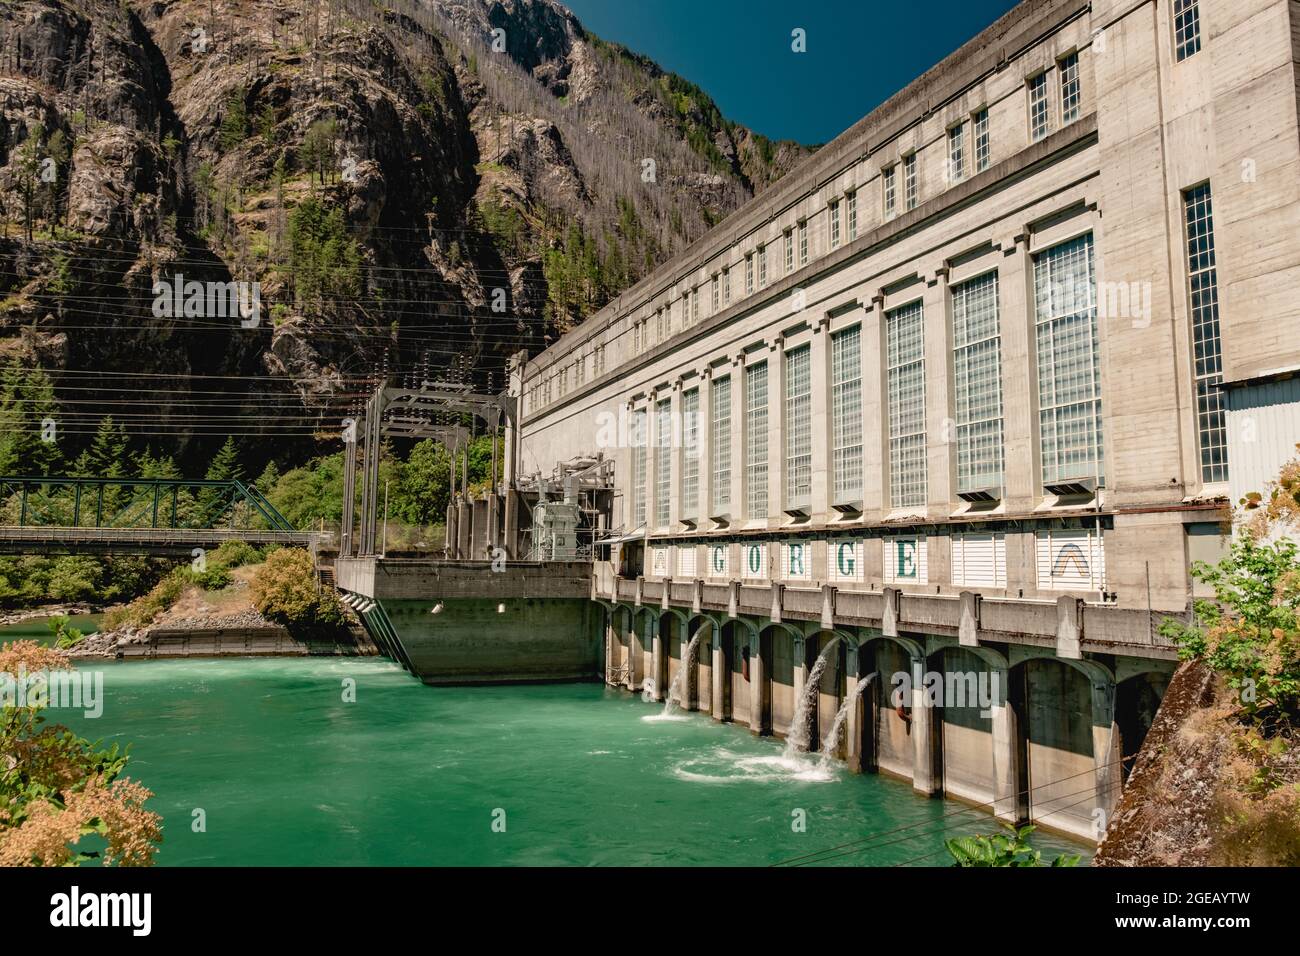 Gorge Powerhouse hydroelectric power plant along the Skagit River in North Cascades National Park. Stock Photo